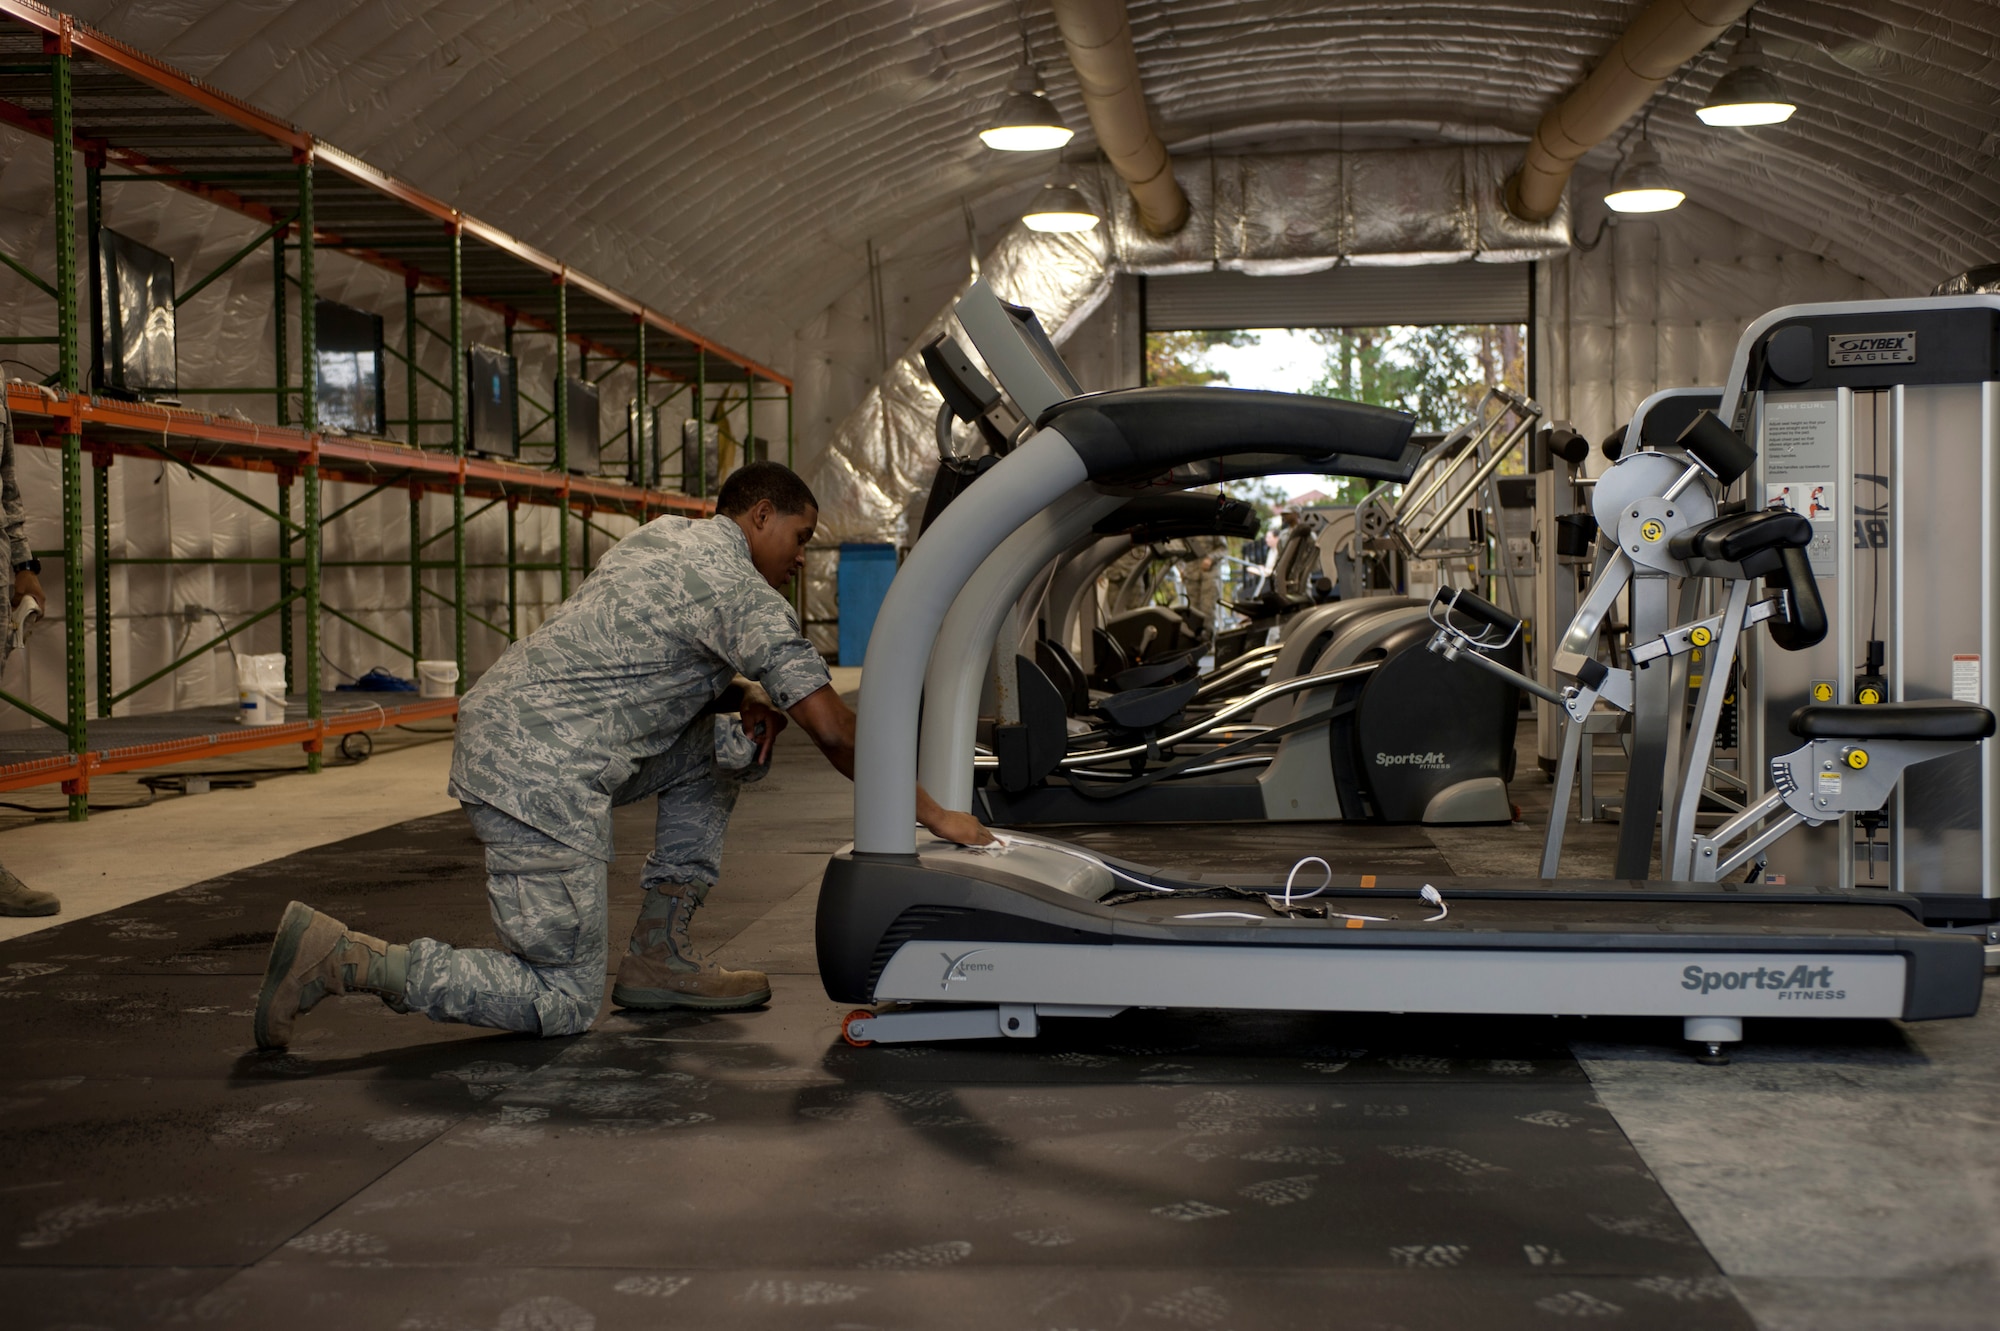 Senior Airman David Royal cleans equipment transferred from base fitness centers Nov. 6, 2014, to the Langley Transit Center at Langley Air Force Base, Va. The Secretary of Defense signed into action a 21-day controlled monitoring period for all returning service members from West Africa, and Joint Base Langley-Eustis is designated as one of Department of Defense’s controlled monitoring sites. Within four days, members assigned to the 633rd Air Base Wing set up an expeditionary dining facility, a contingency fitness center, morale welfare and recreation facilities, high-speed internet access and cable television to accommodate service members staying at the center. Royal is a 633rd Force Support Squadron fitness assessment cell monitor. (U.S. Air Force photo/Staff Sgt. Natasha Stannard)